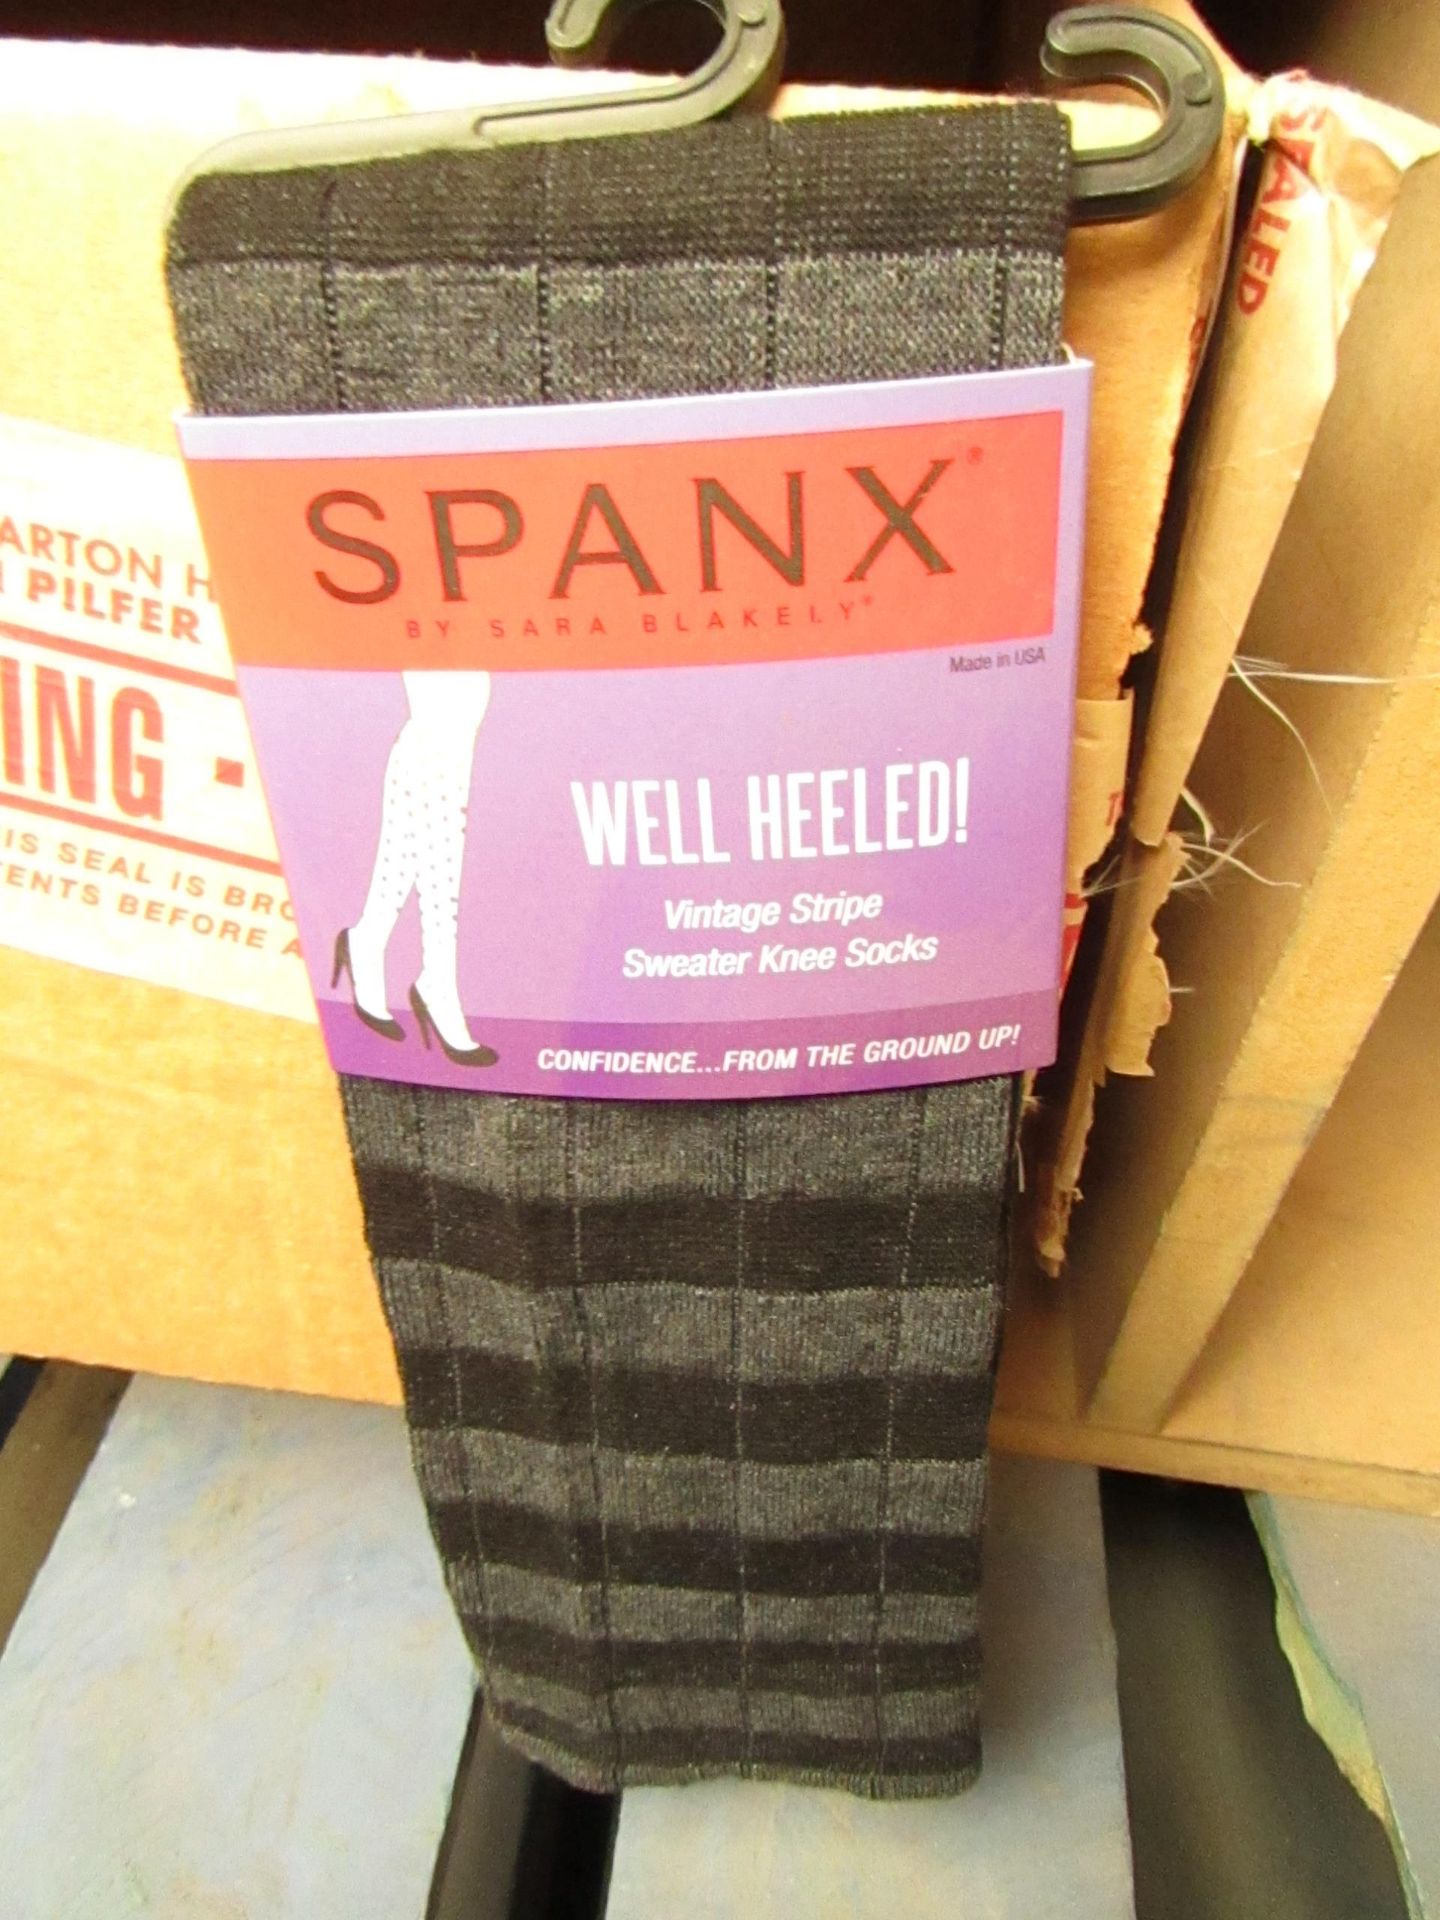 3 x Spanx by Sara Blackely Well Heeled Vintage stripe Sweater Knee Socks one size RRP £5 each on